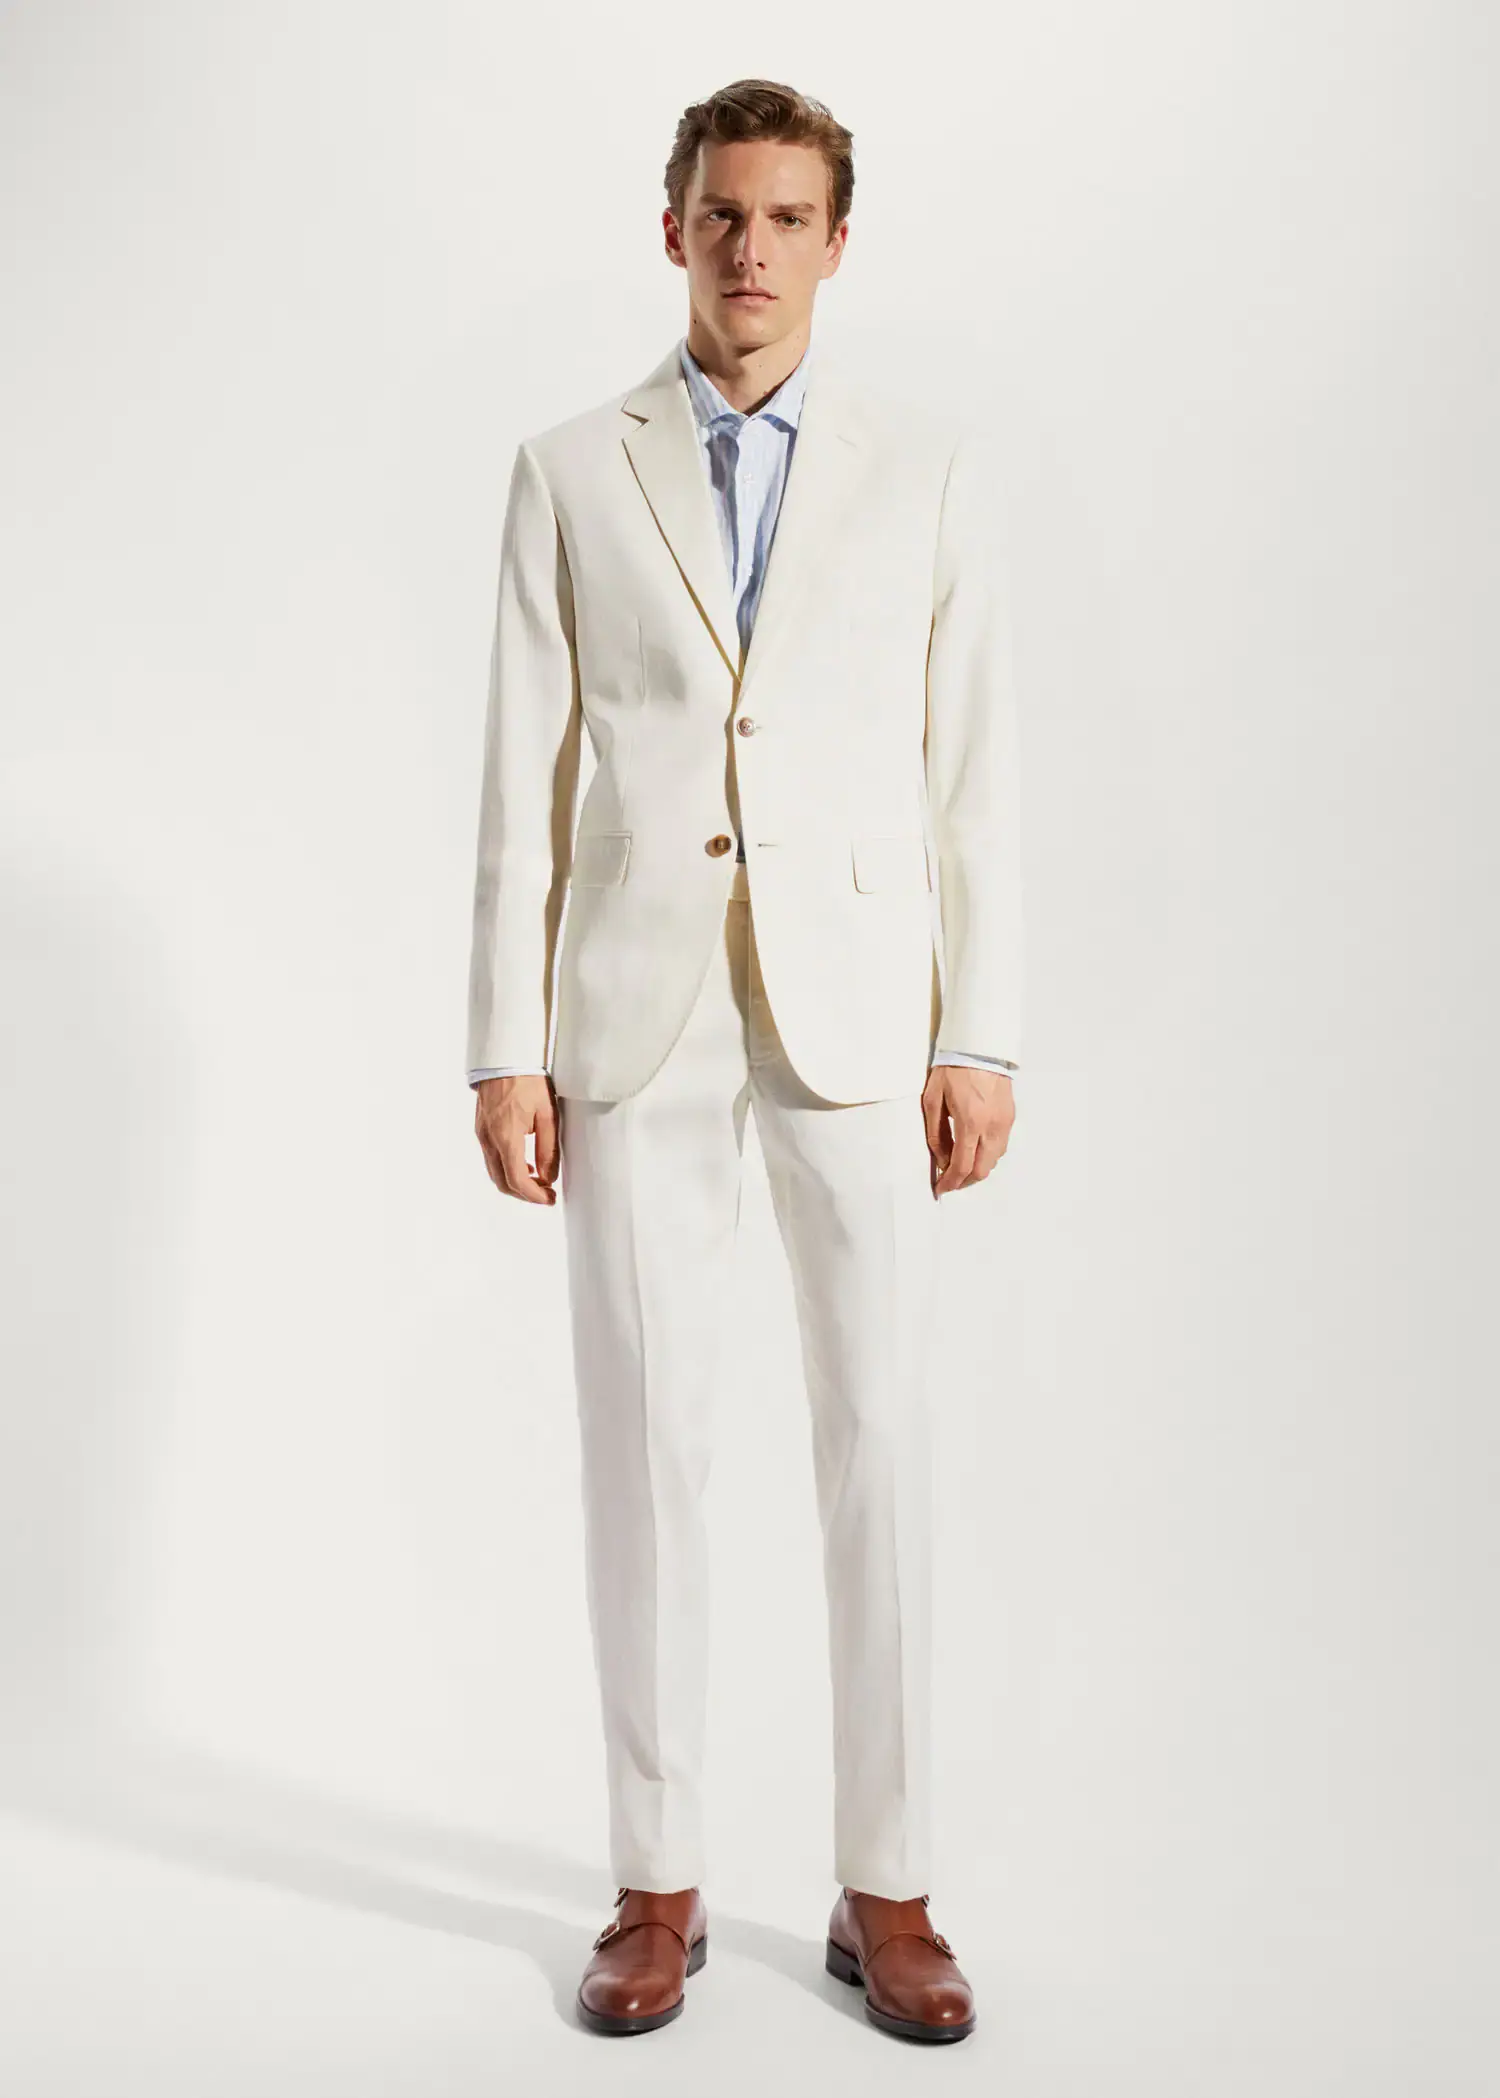 Mango Blazer suit 100% linen. a man in a white suit standing in front of a white wall. 